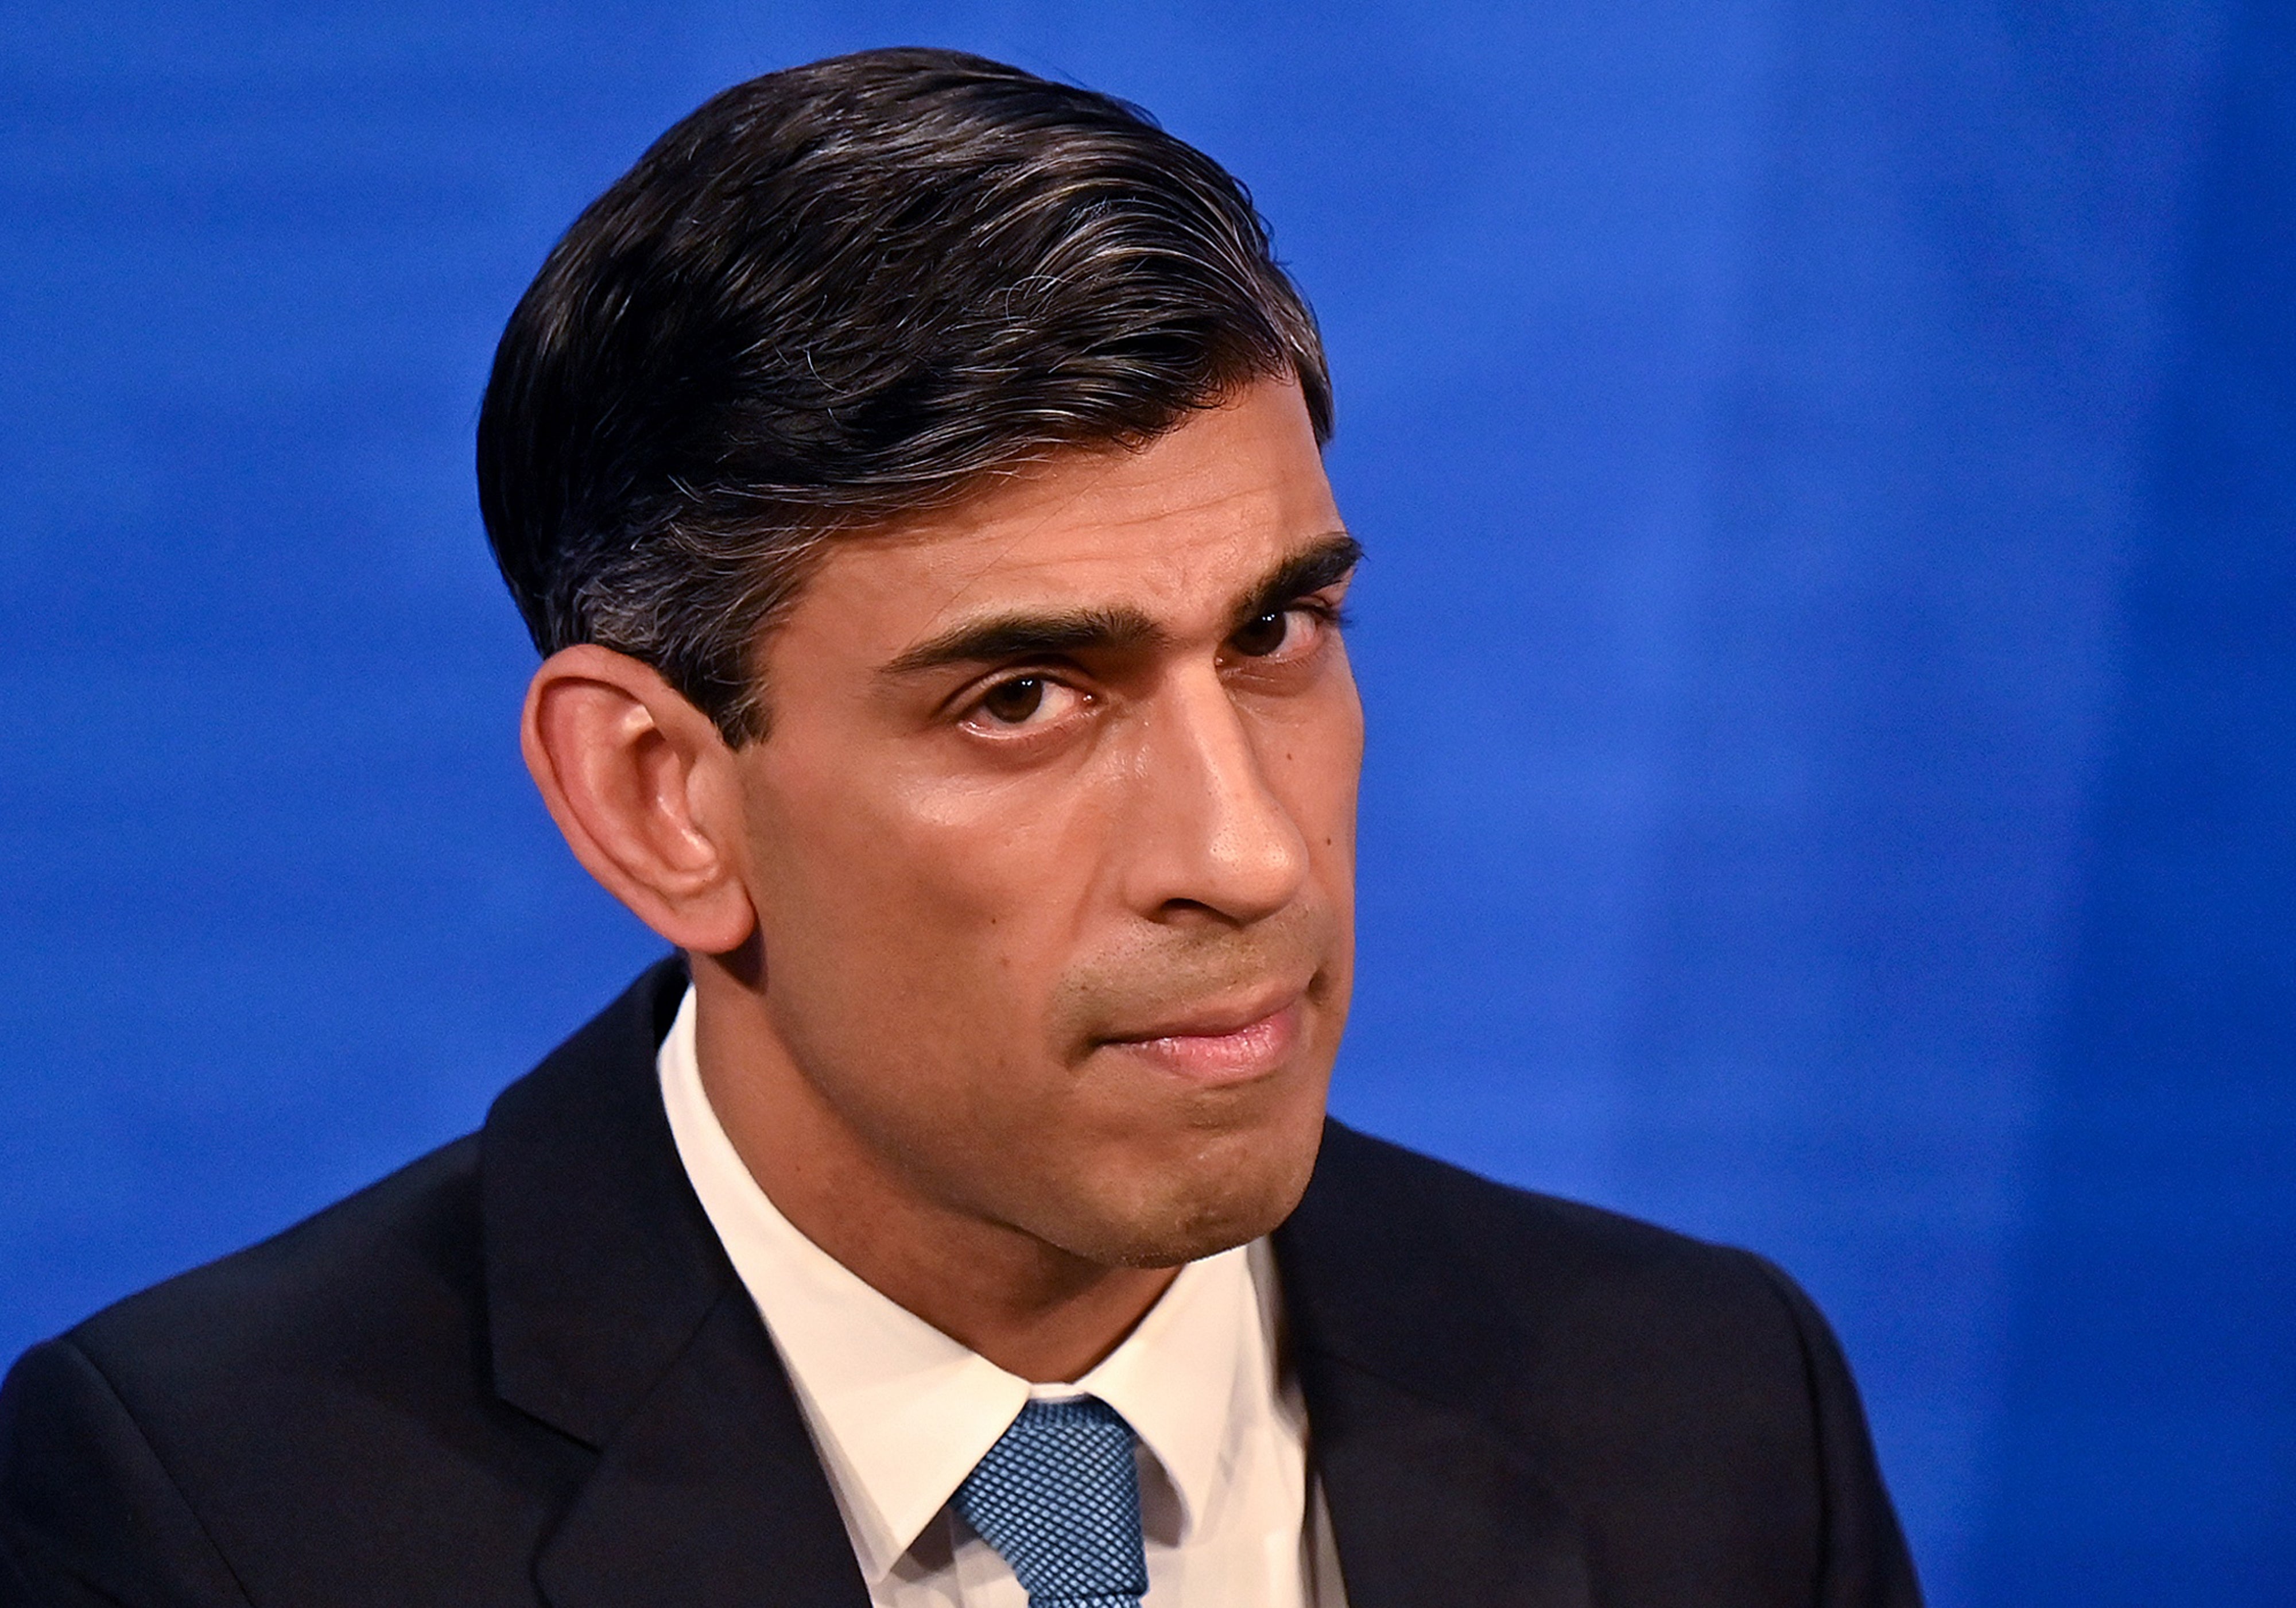 Chancellor Rishi Sunak speaking at a press conference in Downing Street on Thursday (Justin Tallis/PA)